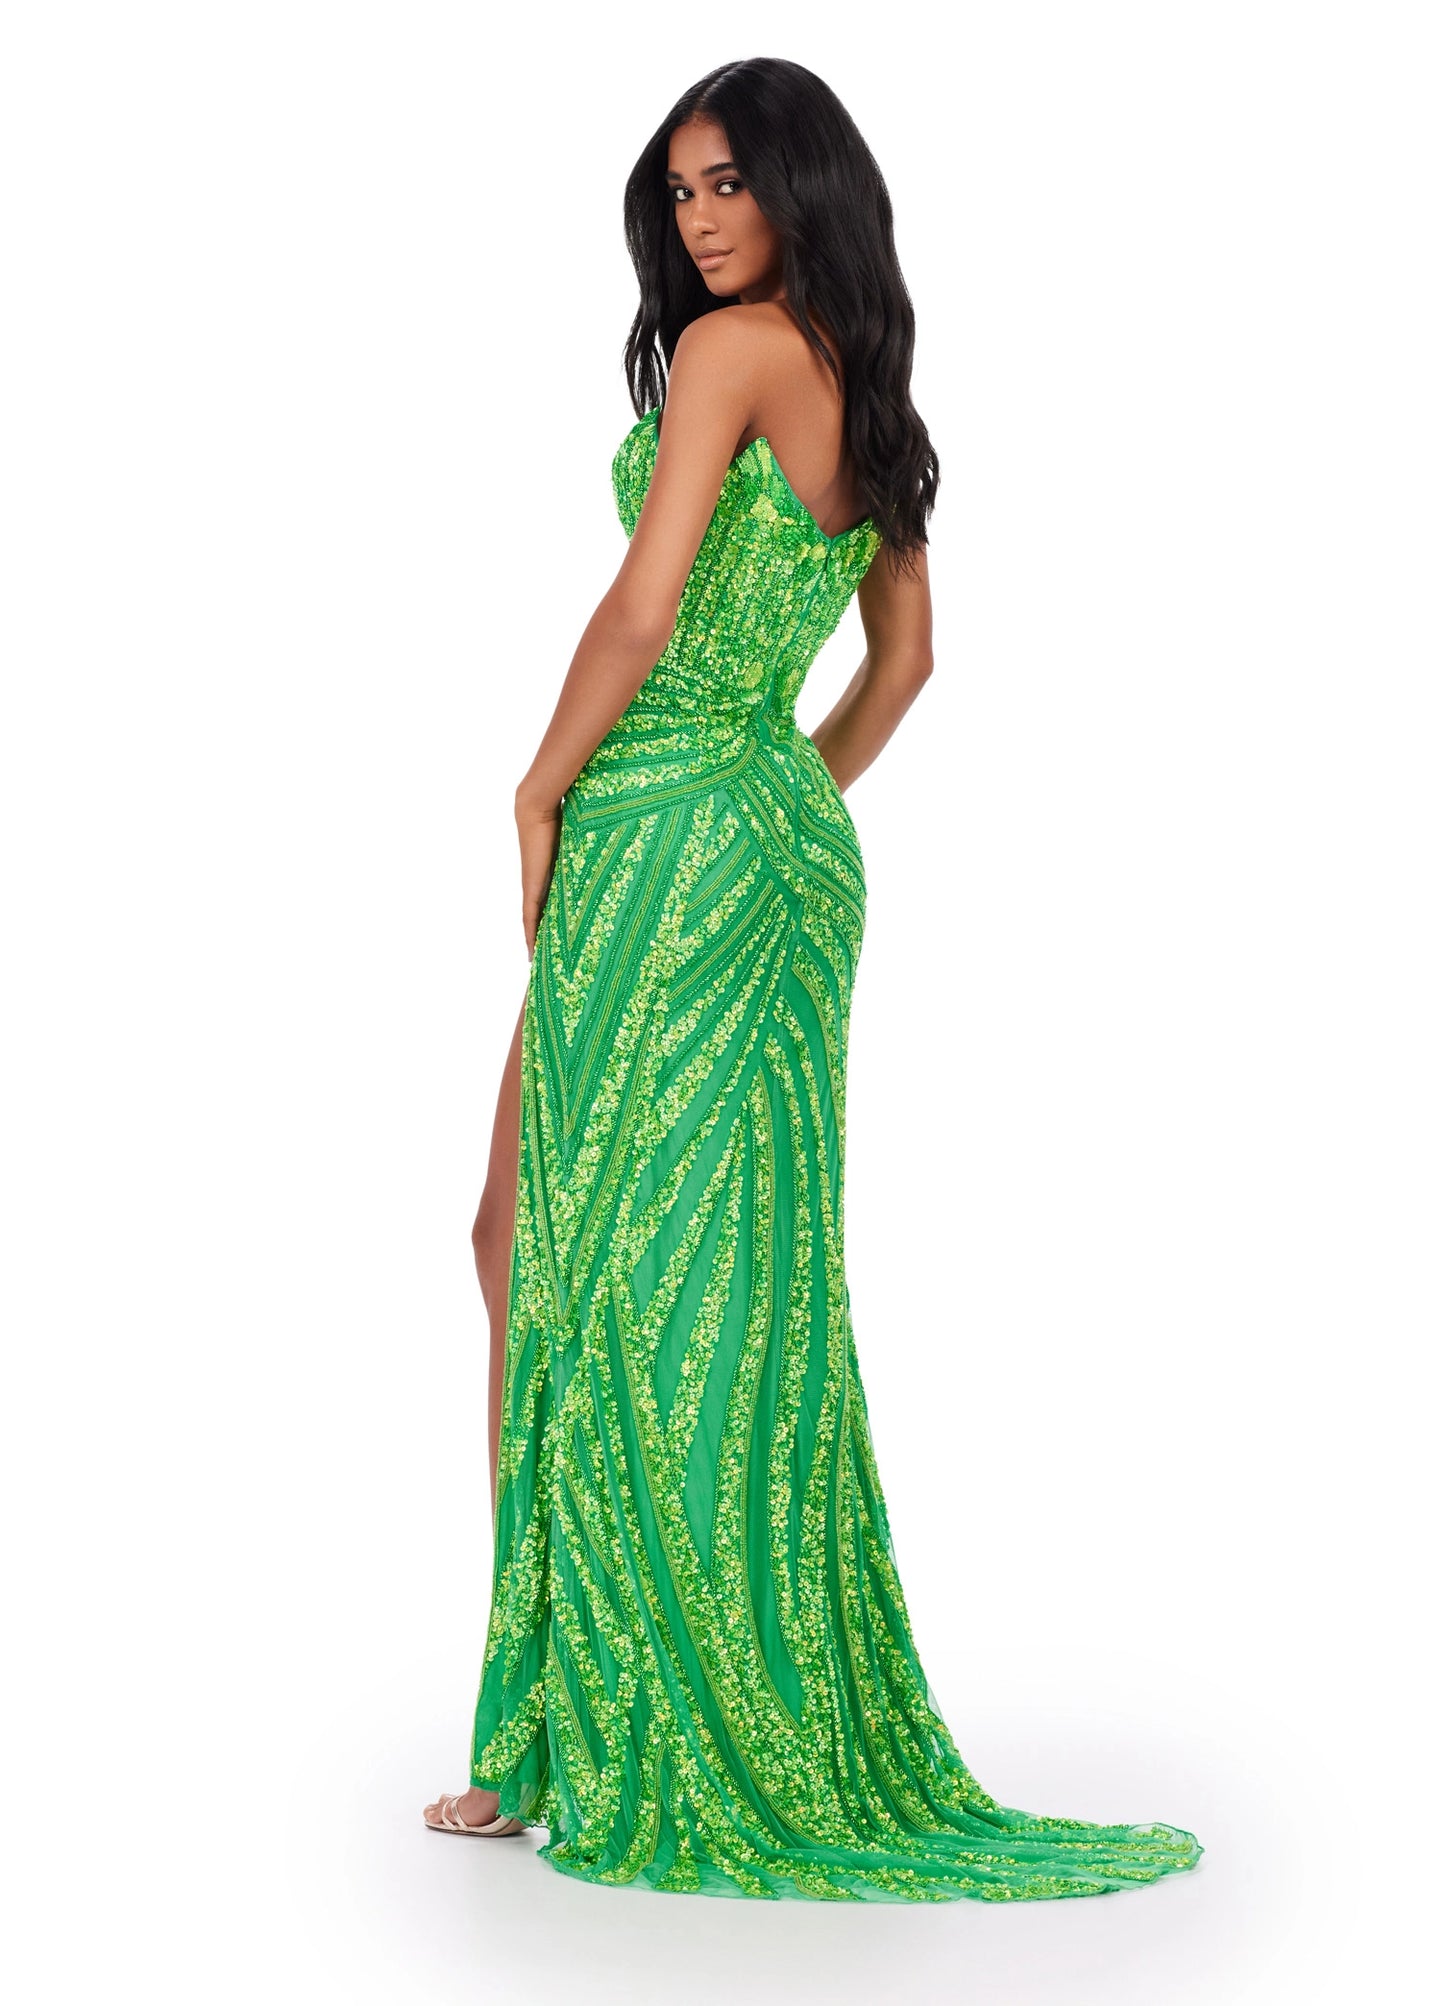 Ashley Lauren 11236 Long Fitted V Neck Slit Beaded Sequin Prom Dress Pageant Gown This strapless gown is sure to turn heads. The sweetheart neckline is complete with a modern floral sequin motif that continues down the bustier and skirt. The skirt is complete with a left leg slit.  COLORS: Blue/Jade, Candy Pink, Gold/Black, Lilac, Sky, Silver/Nude, Electric Lime, Bright Pink, Sky/Nude, Coral, Silver/Ivory, Turquoise/Royal, Rose Gold, Gold/Ivory, Red, Gold Sizes: 00-16